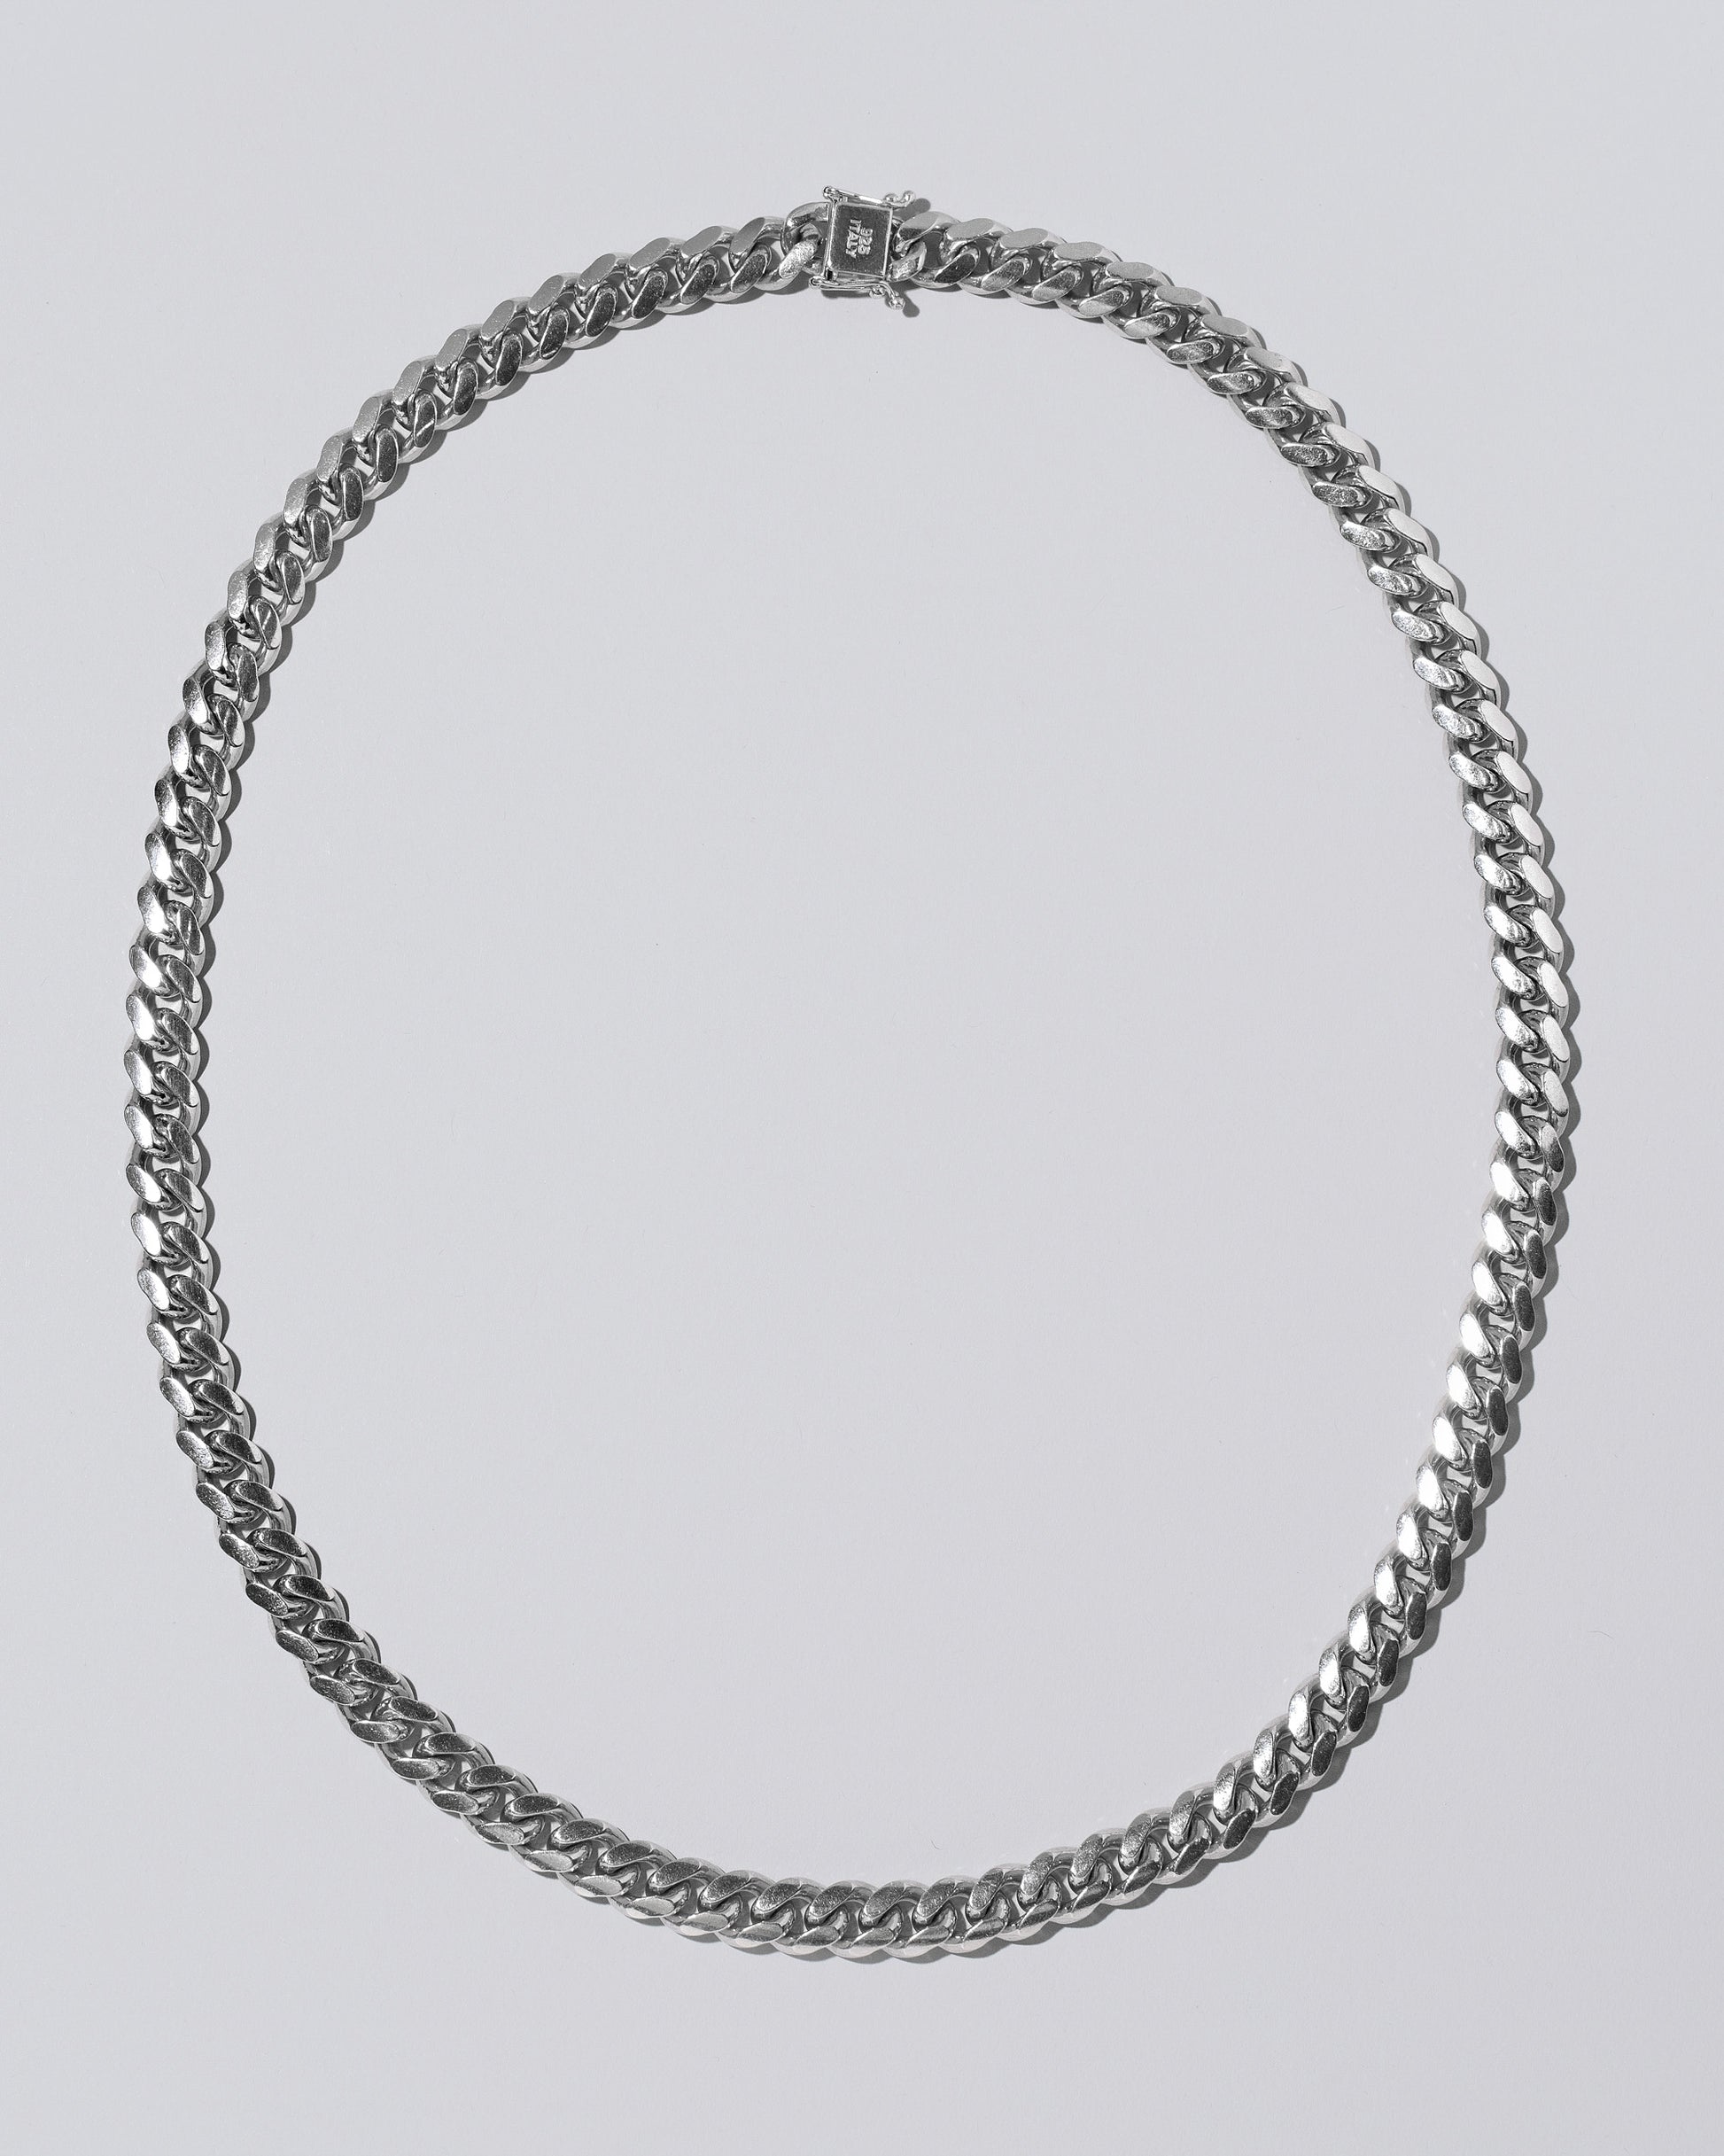 Silver Cuban Chain on light color background.